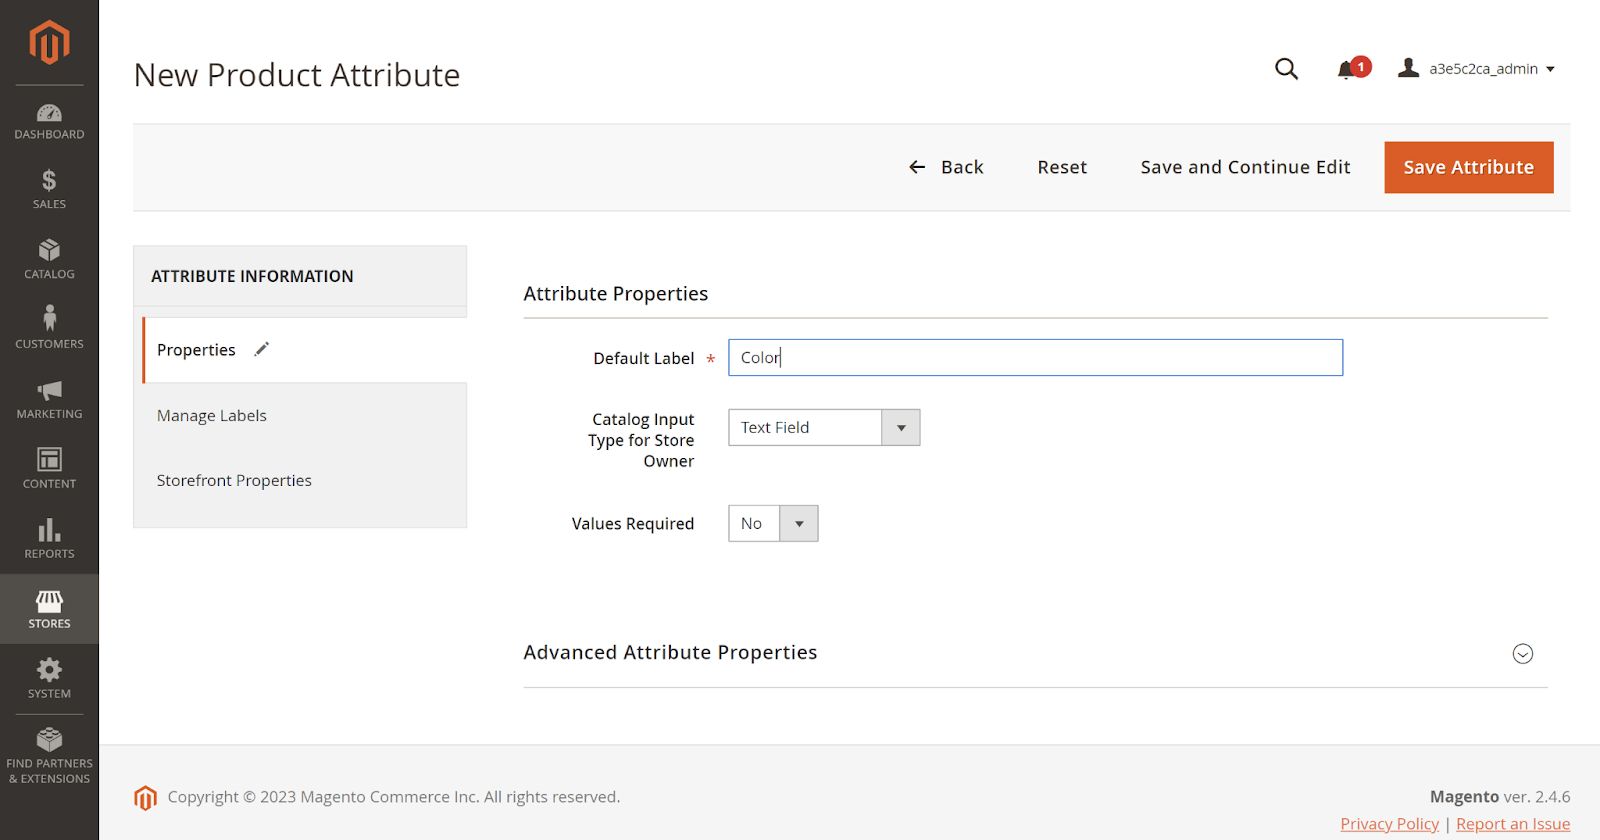 Strategically select product attributes and search terms. 